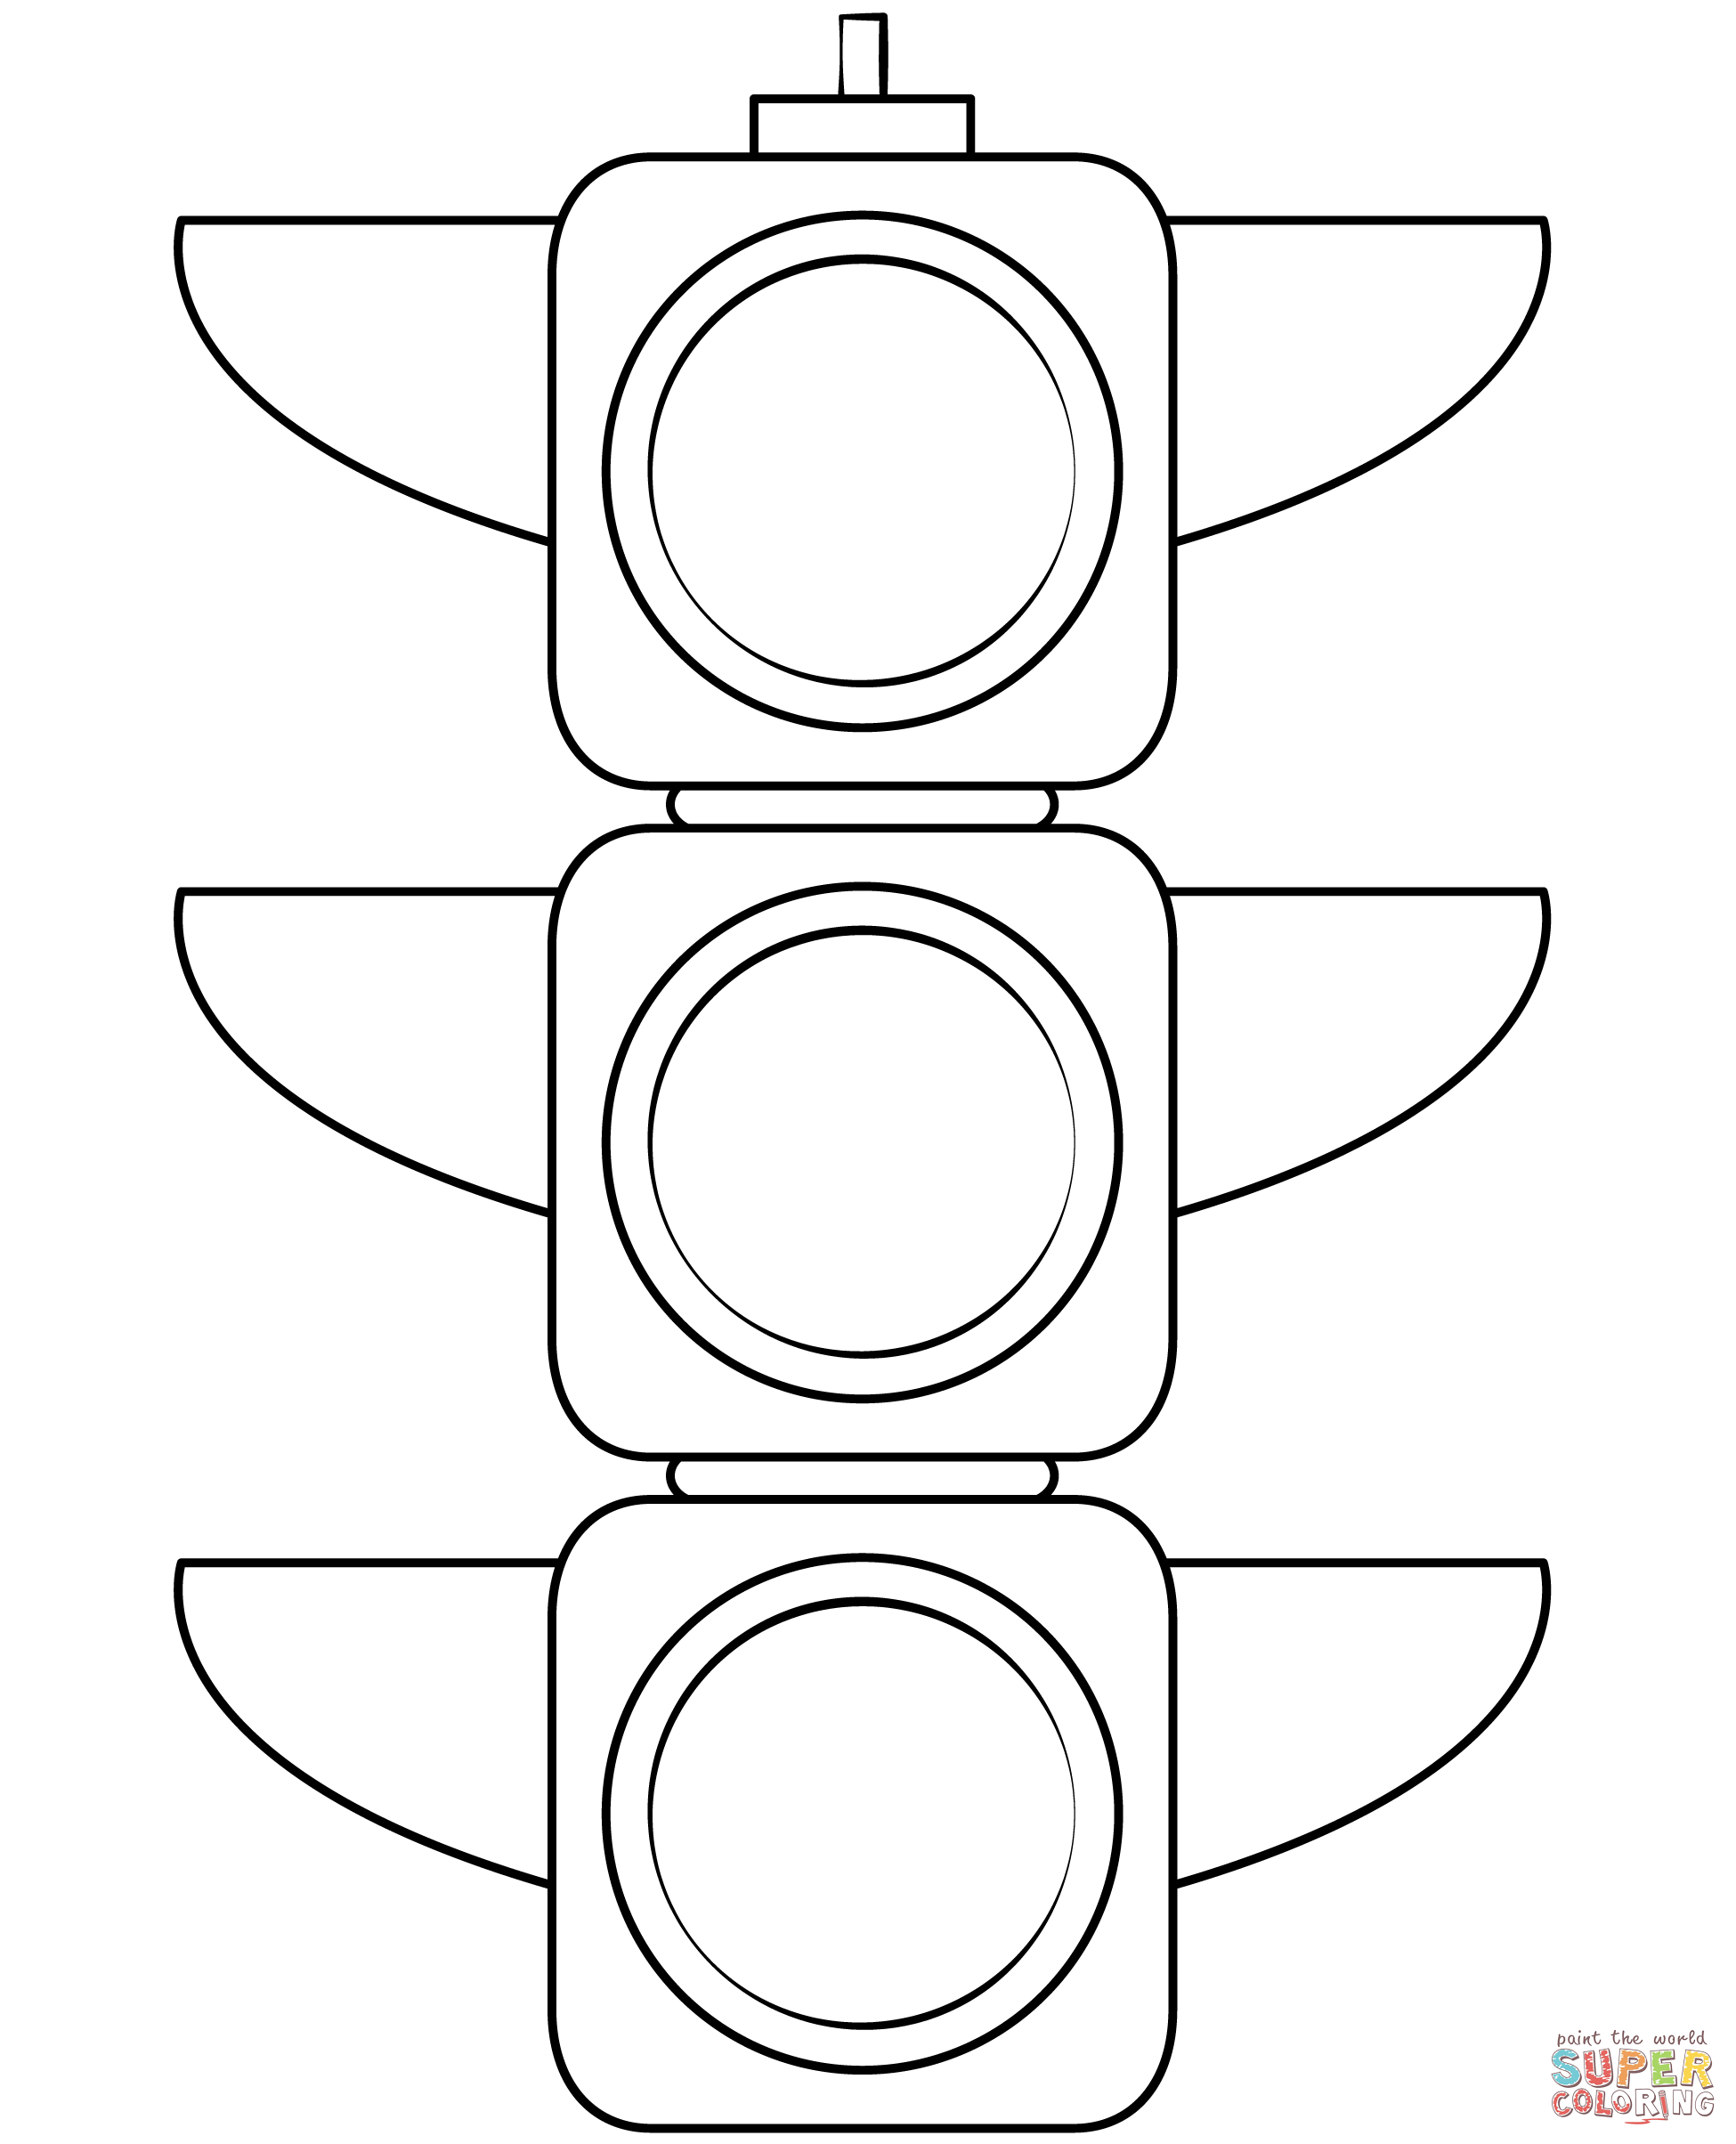 Traffic light coloring page free printable coloring pages